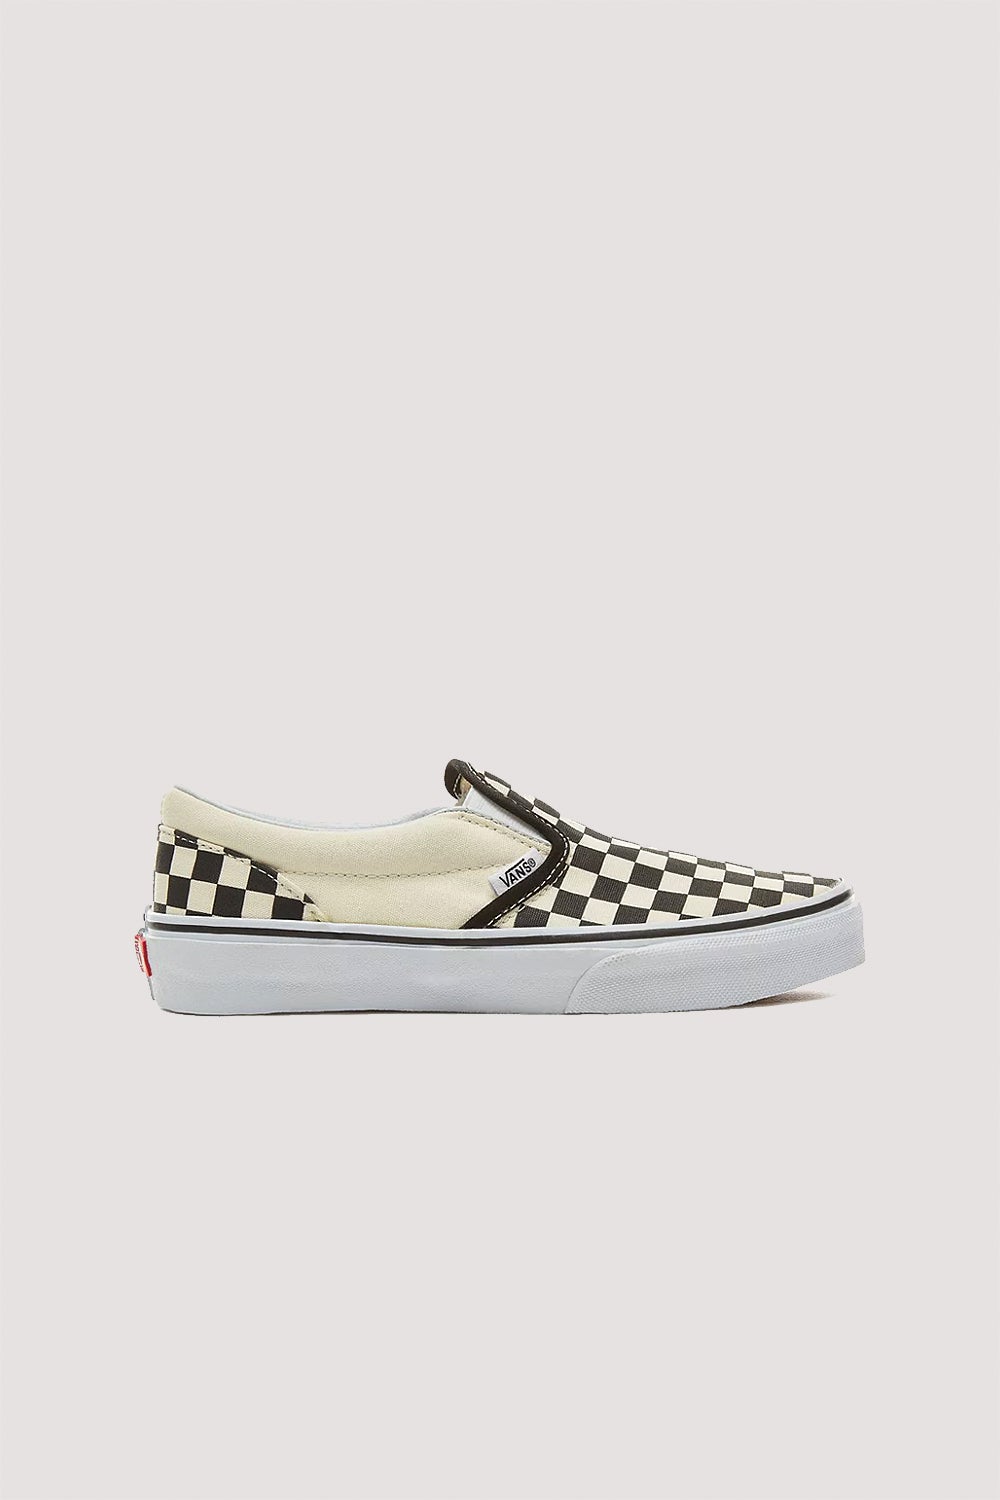 Youth Classic Slip On Checkerboard Shoe | North Beach